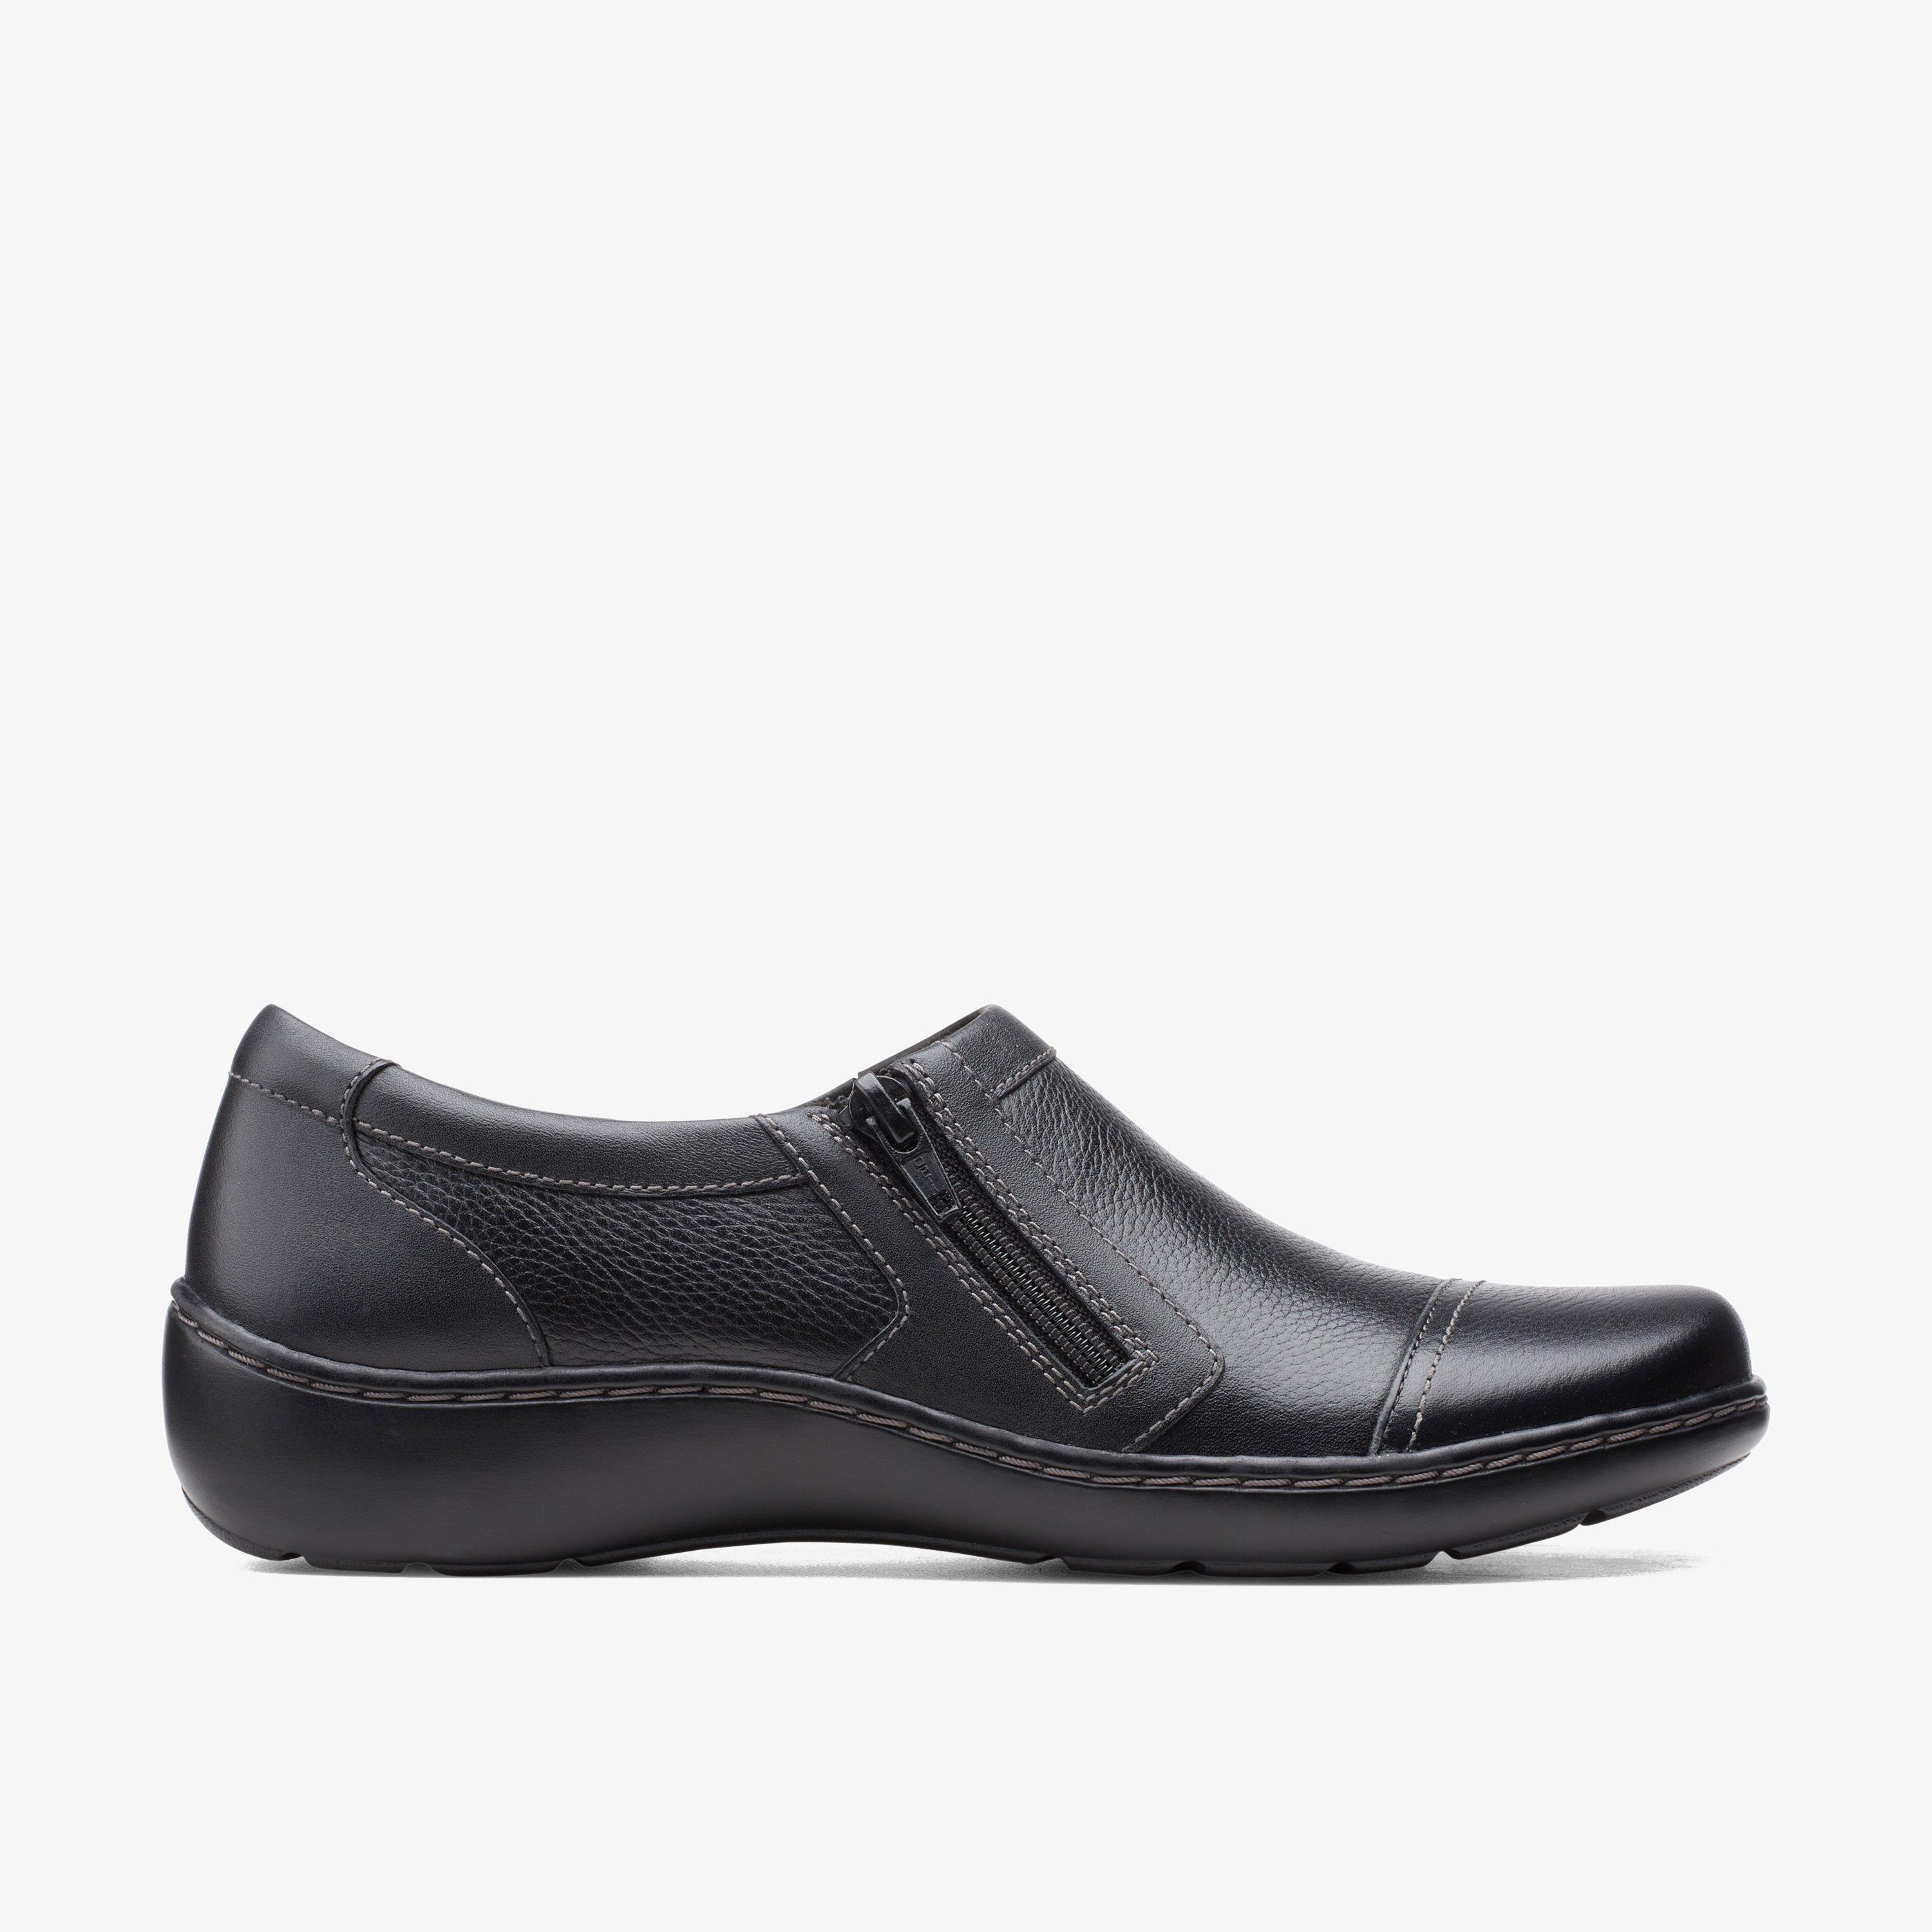 WOMENS Cora Giny Black Tumbled Trouser Shoes | Clarks Outlet